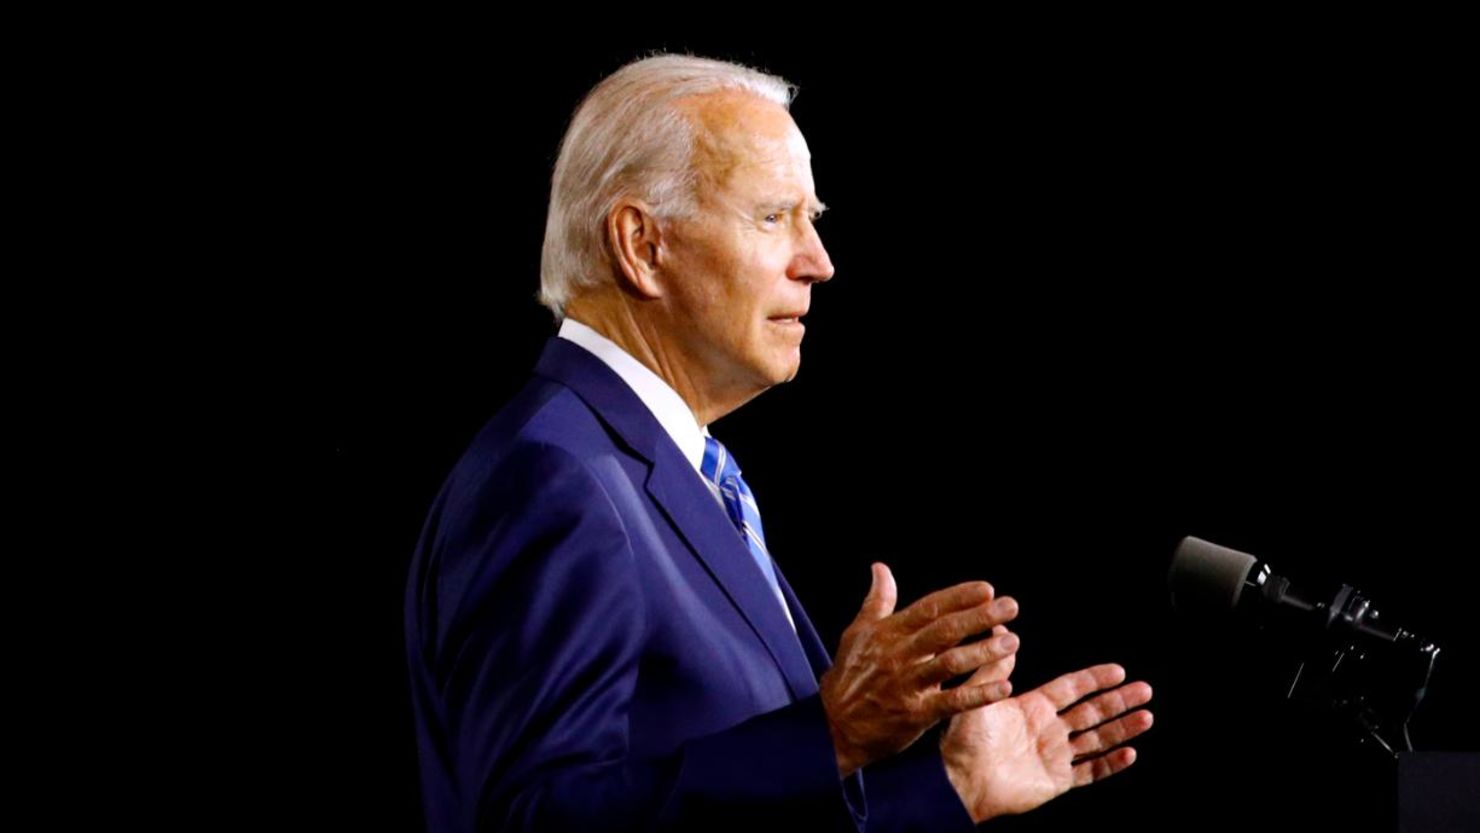 Joe Biden speaks during a campaign event on July 14, 2020.